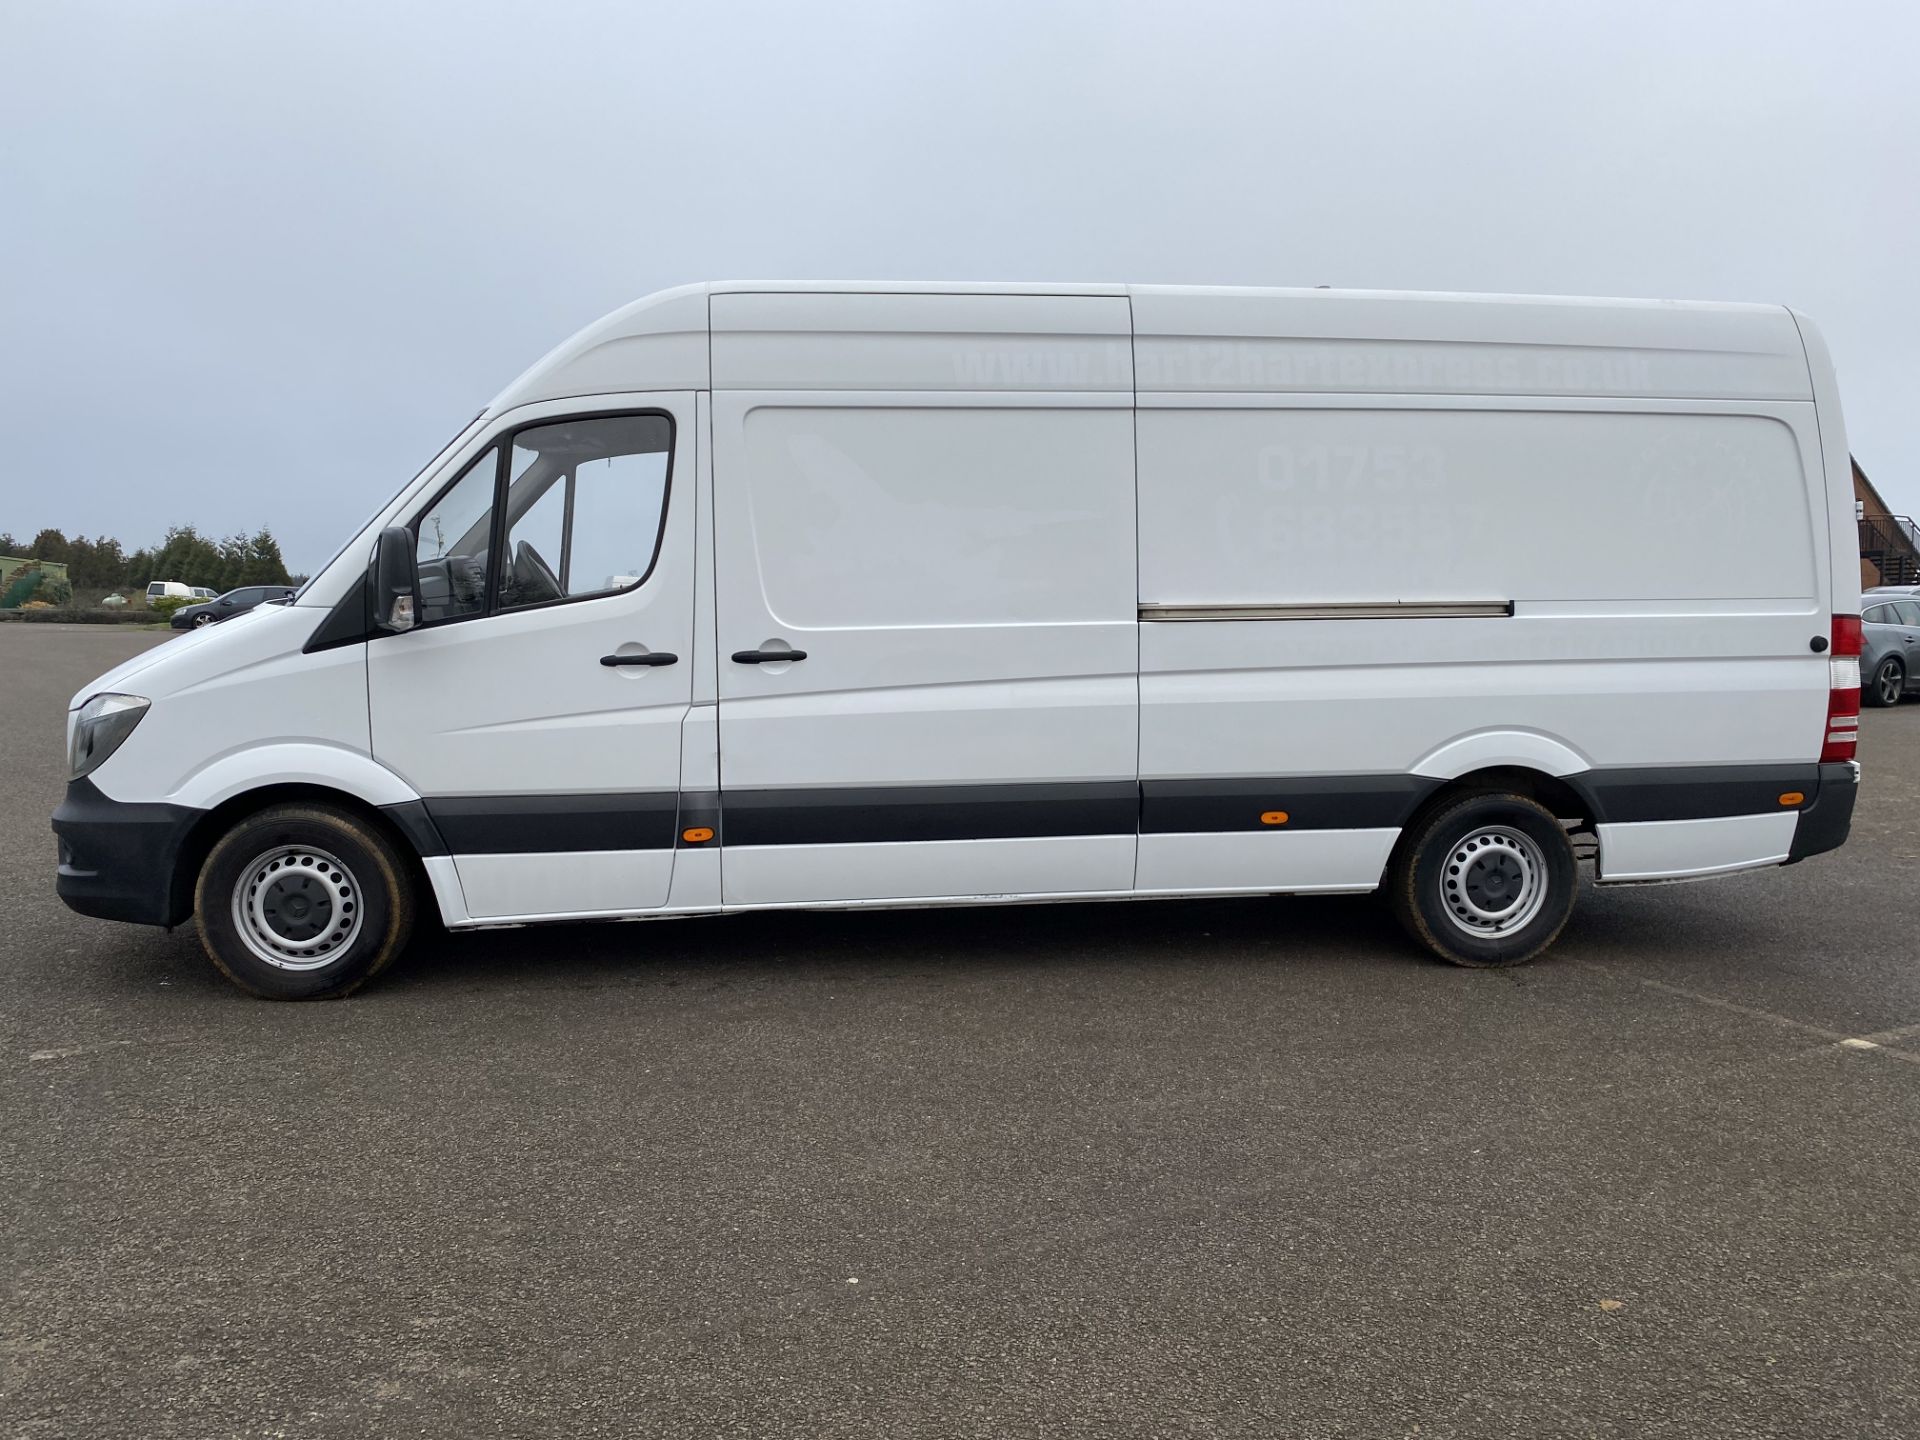 On Sale MERCEDES SPRINTER 314CDI "LWB HIGH ROOF" (140) 2018 MODEL - 1 OWNER - LOW MILES - "EURO 6" - Image 2 of 8